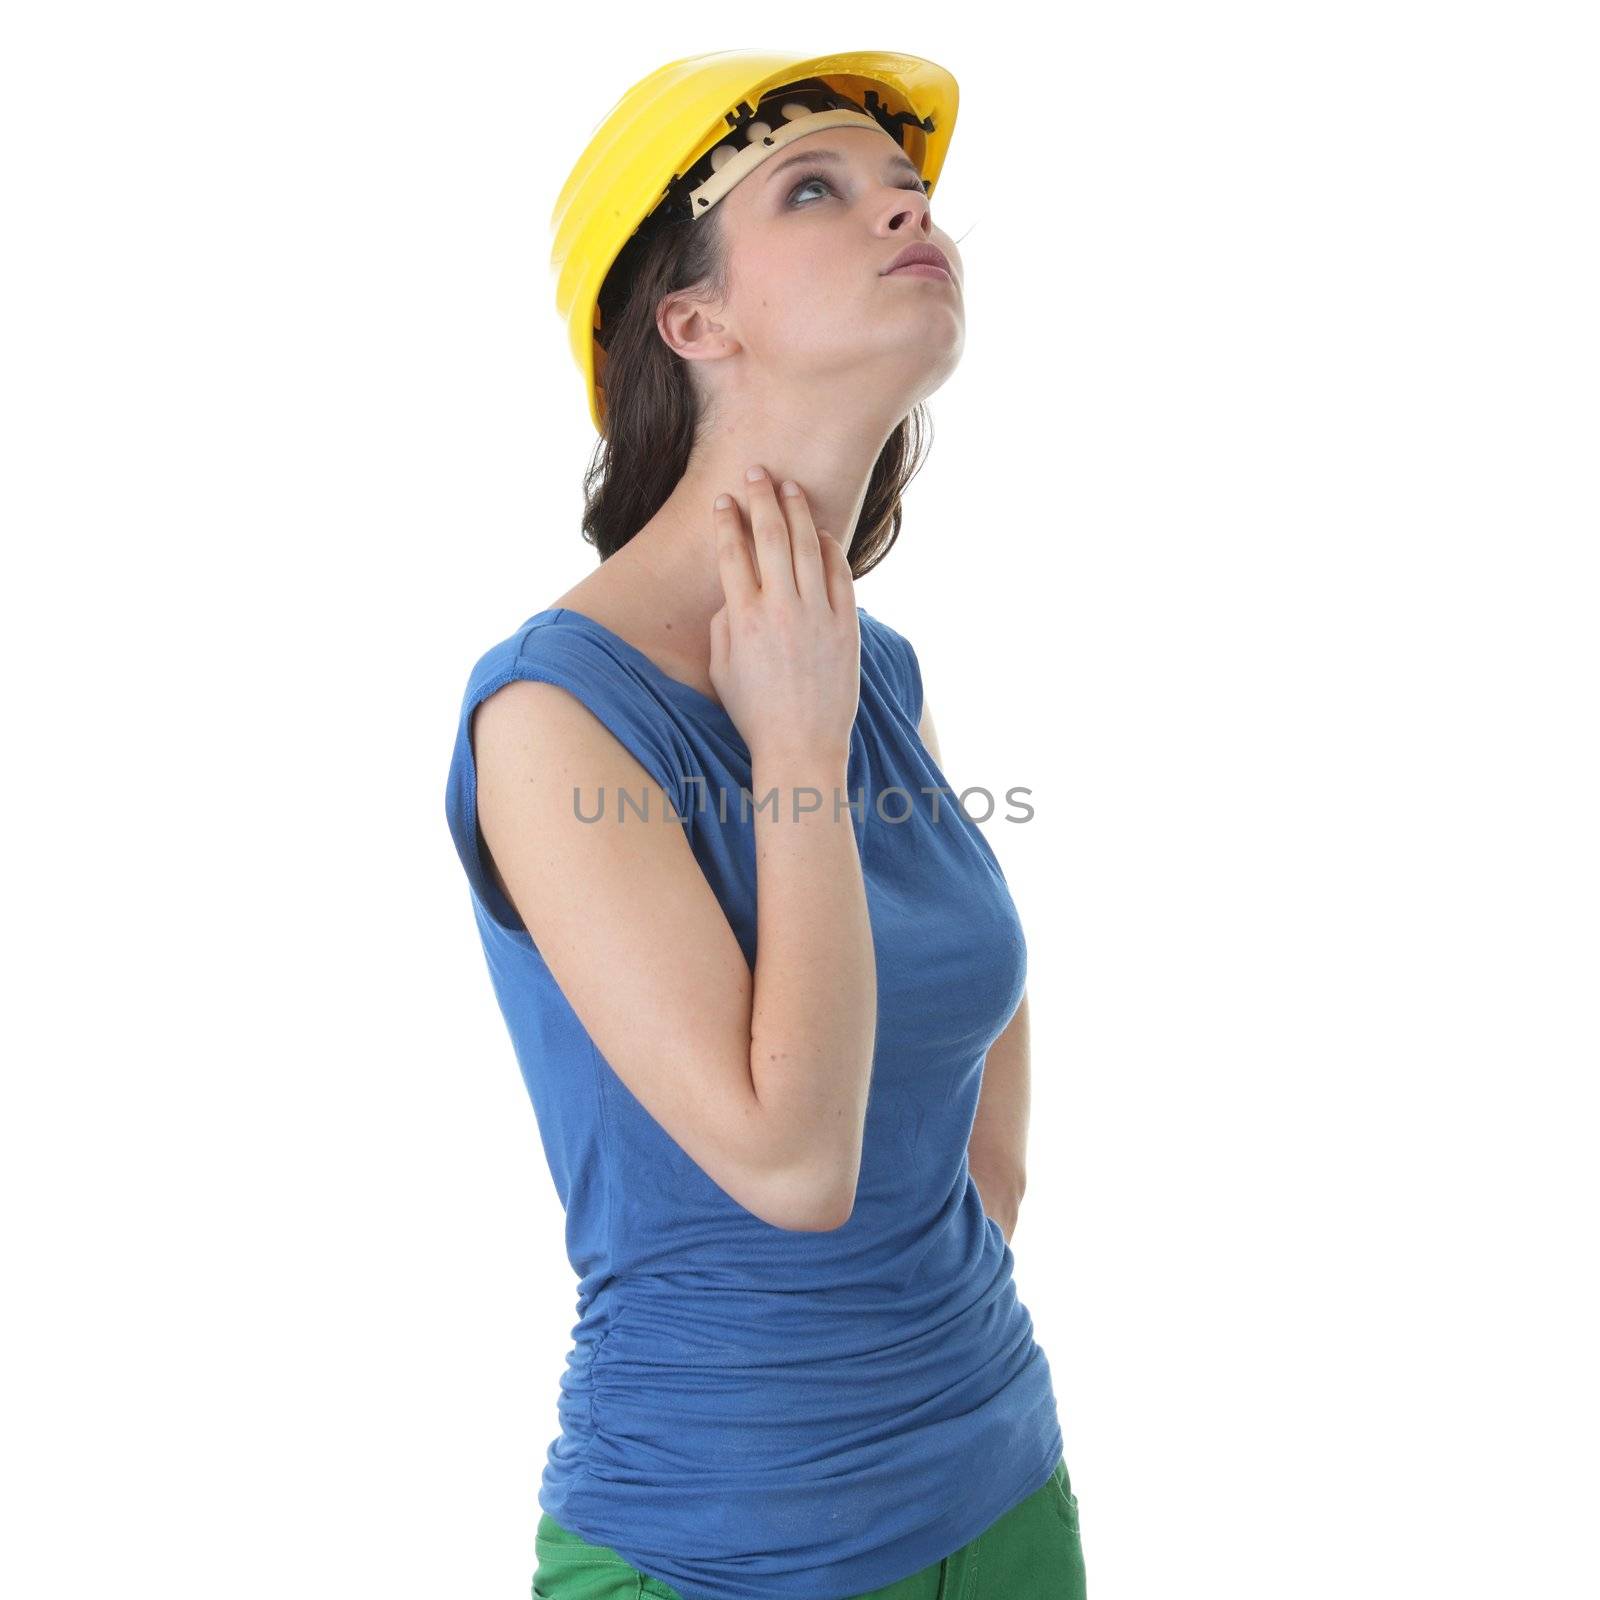 Young female architect or builder wearing a yellow hart hat on a construction site